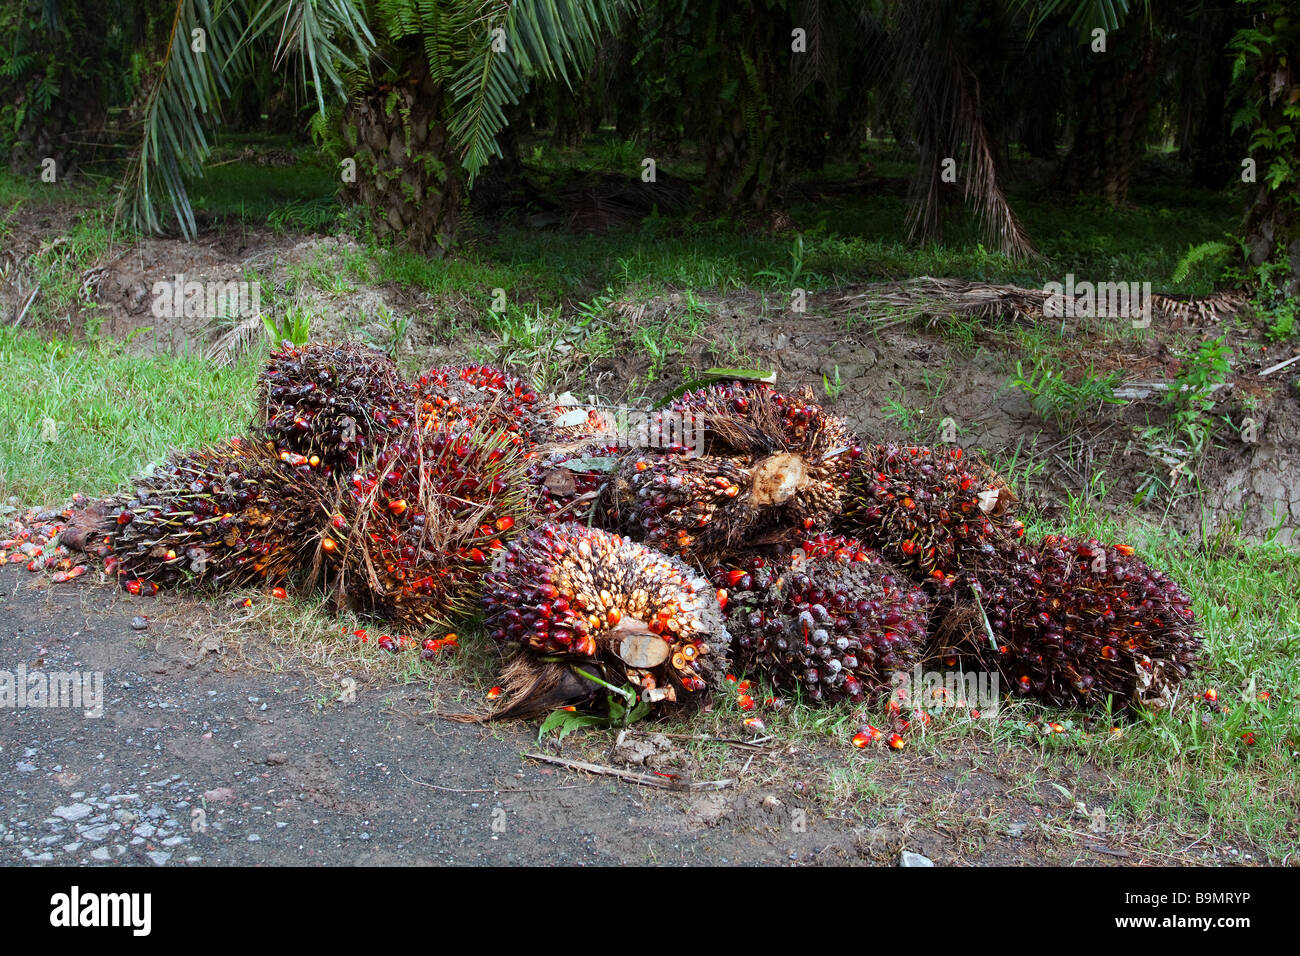 Oil Palm kernels collected by the roadside of a plantation near Sandakan Sabah Malaysia Borneo Stock Photo